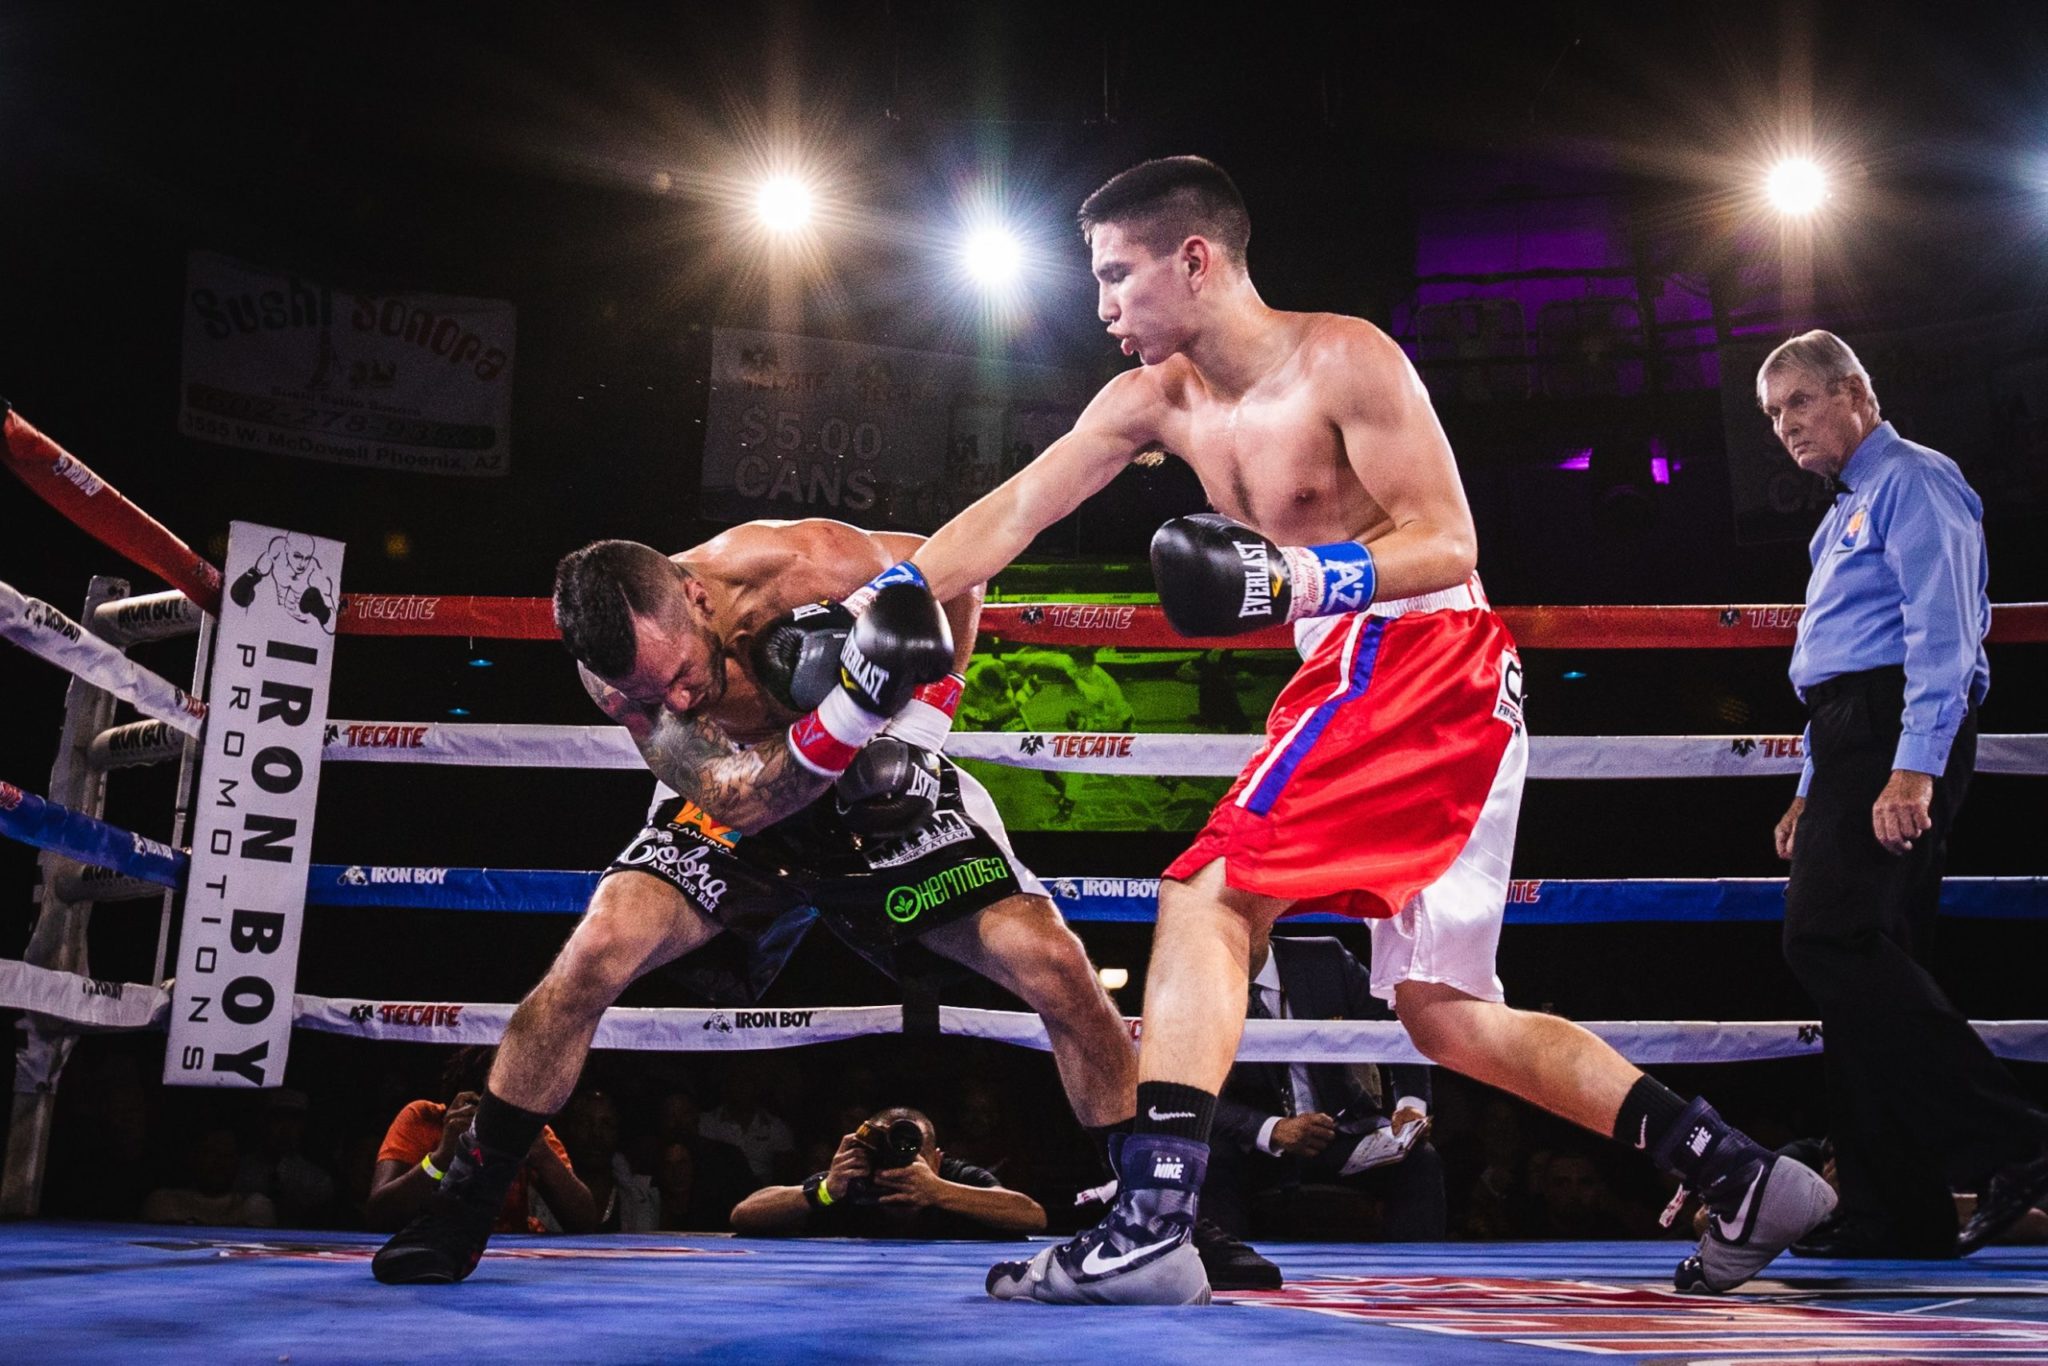 Delineated Boxing Rules, Scoring, And Everything You Need To Know